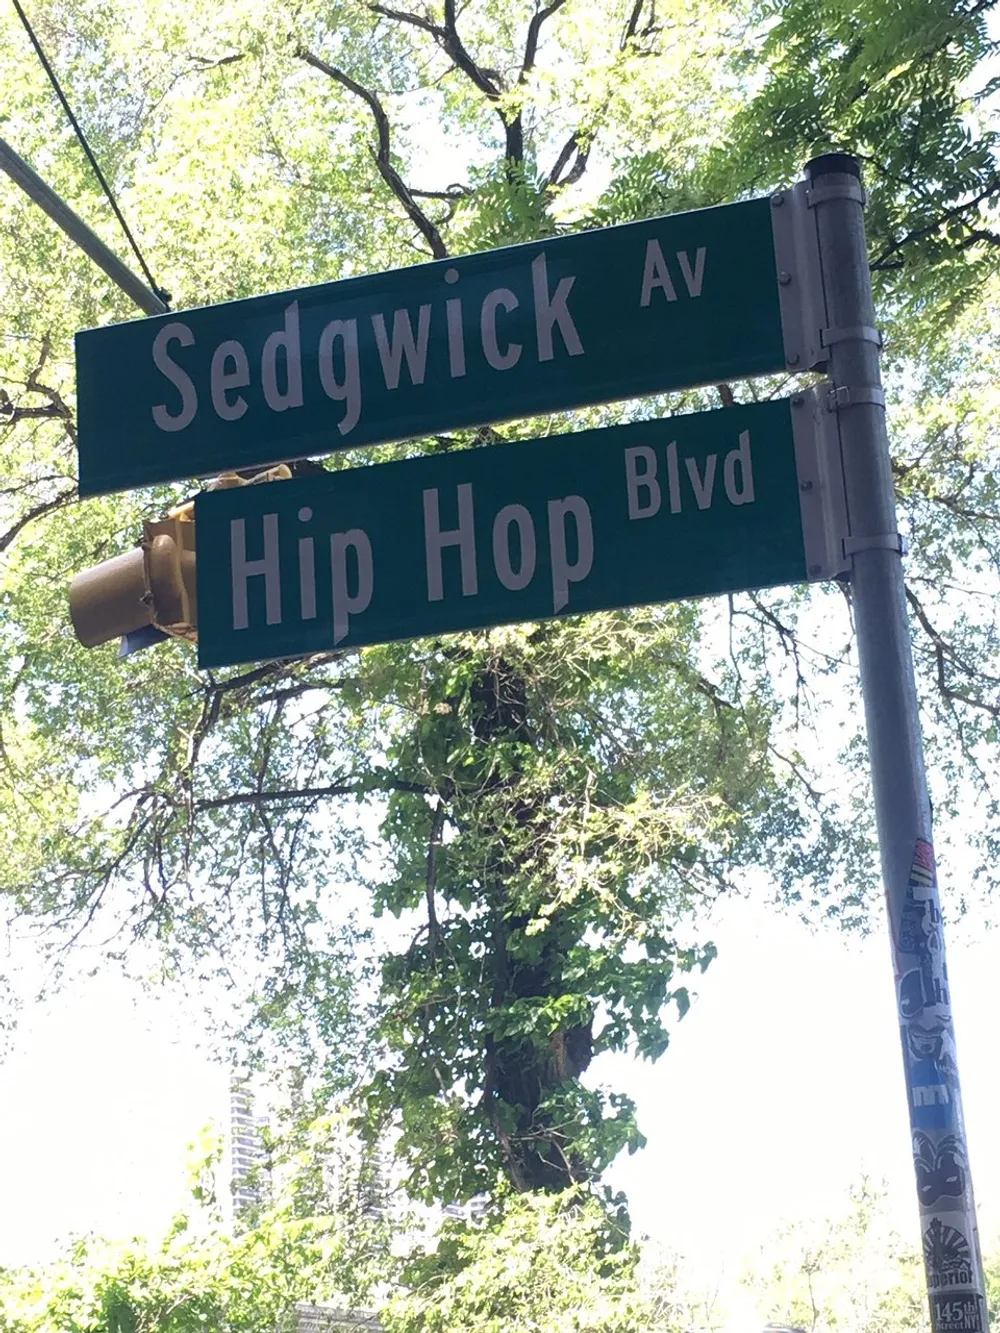 The image shows street signs at an intersection for Sedgwick Av and Hip Hop Blvd with a green leafy background and a sunny sky